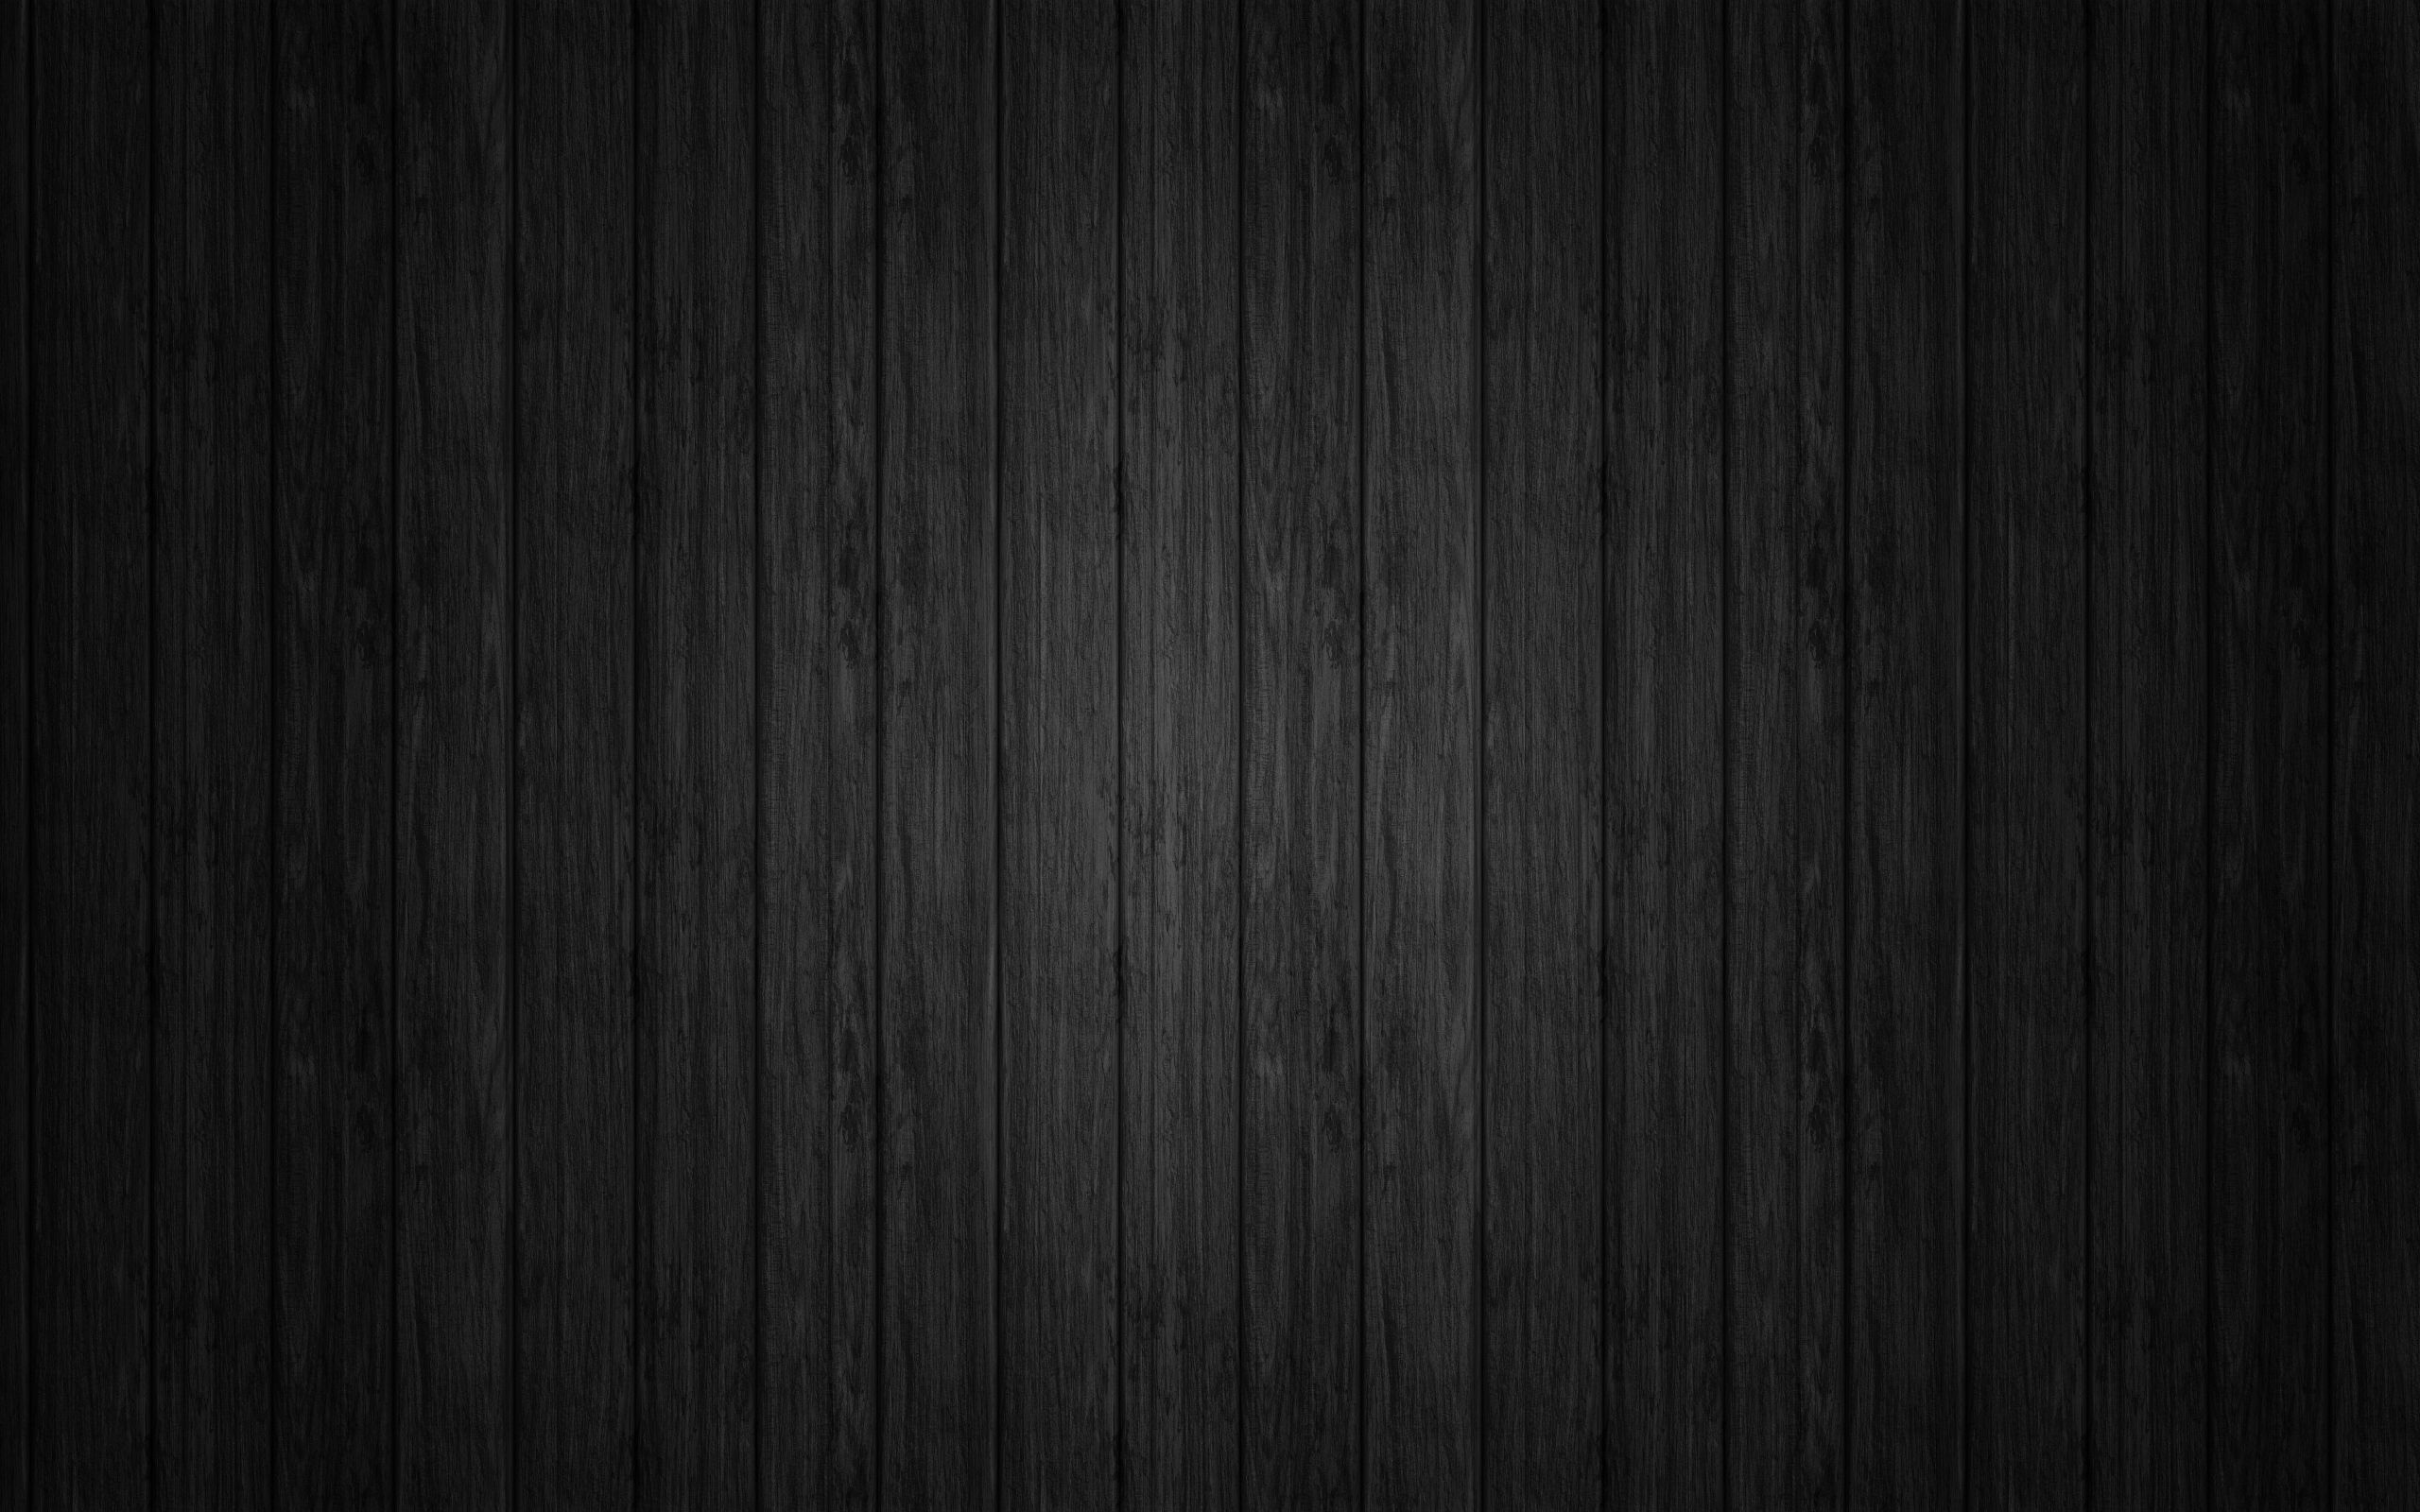 Download Wallpaper 2560x1600 Board Black Line Texture Background Wood Hd Background